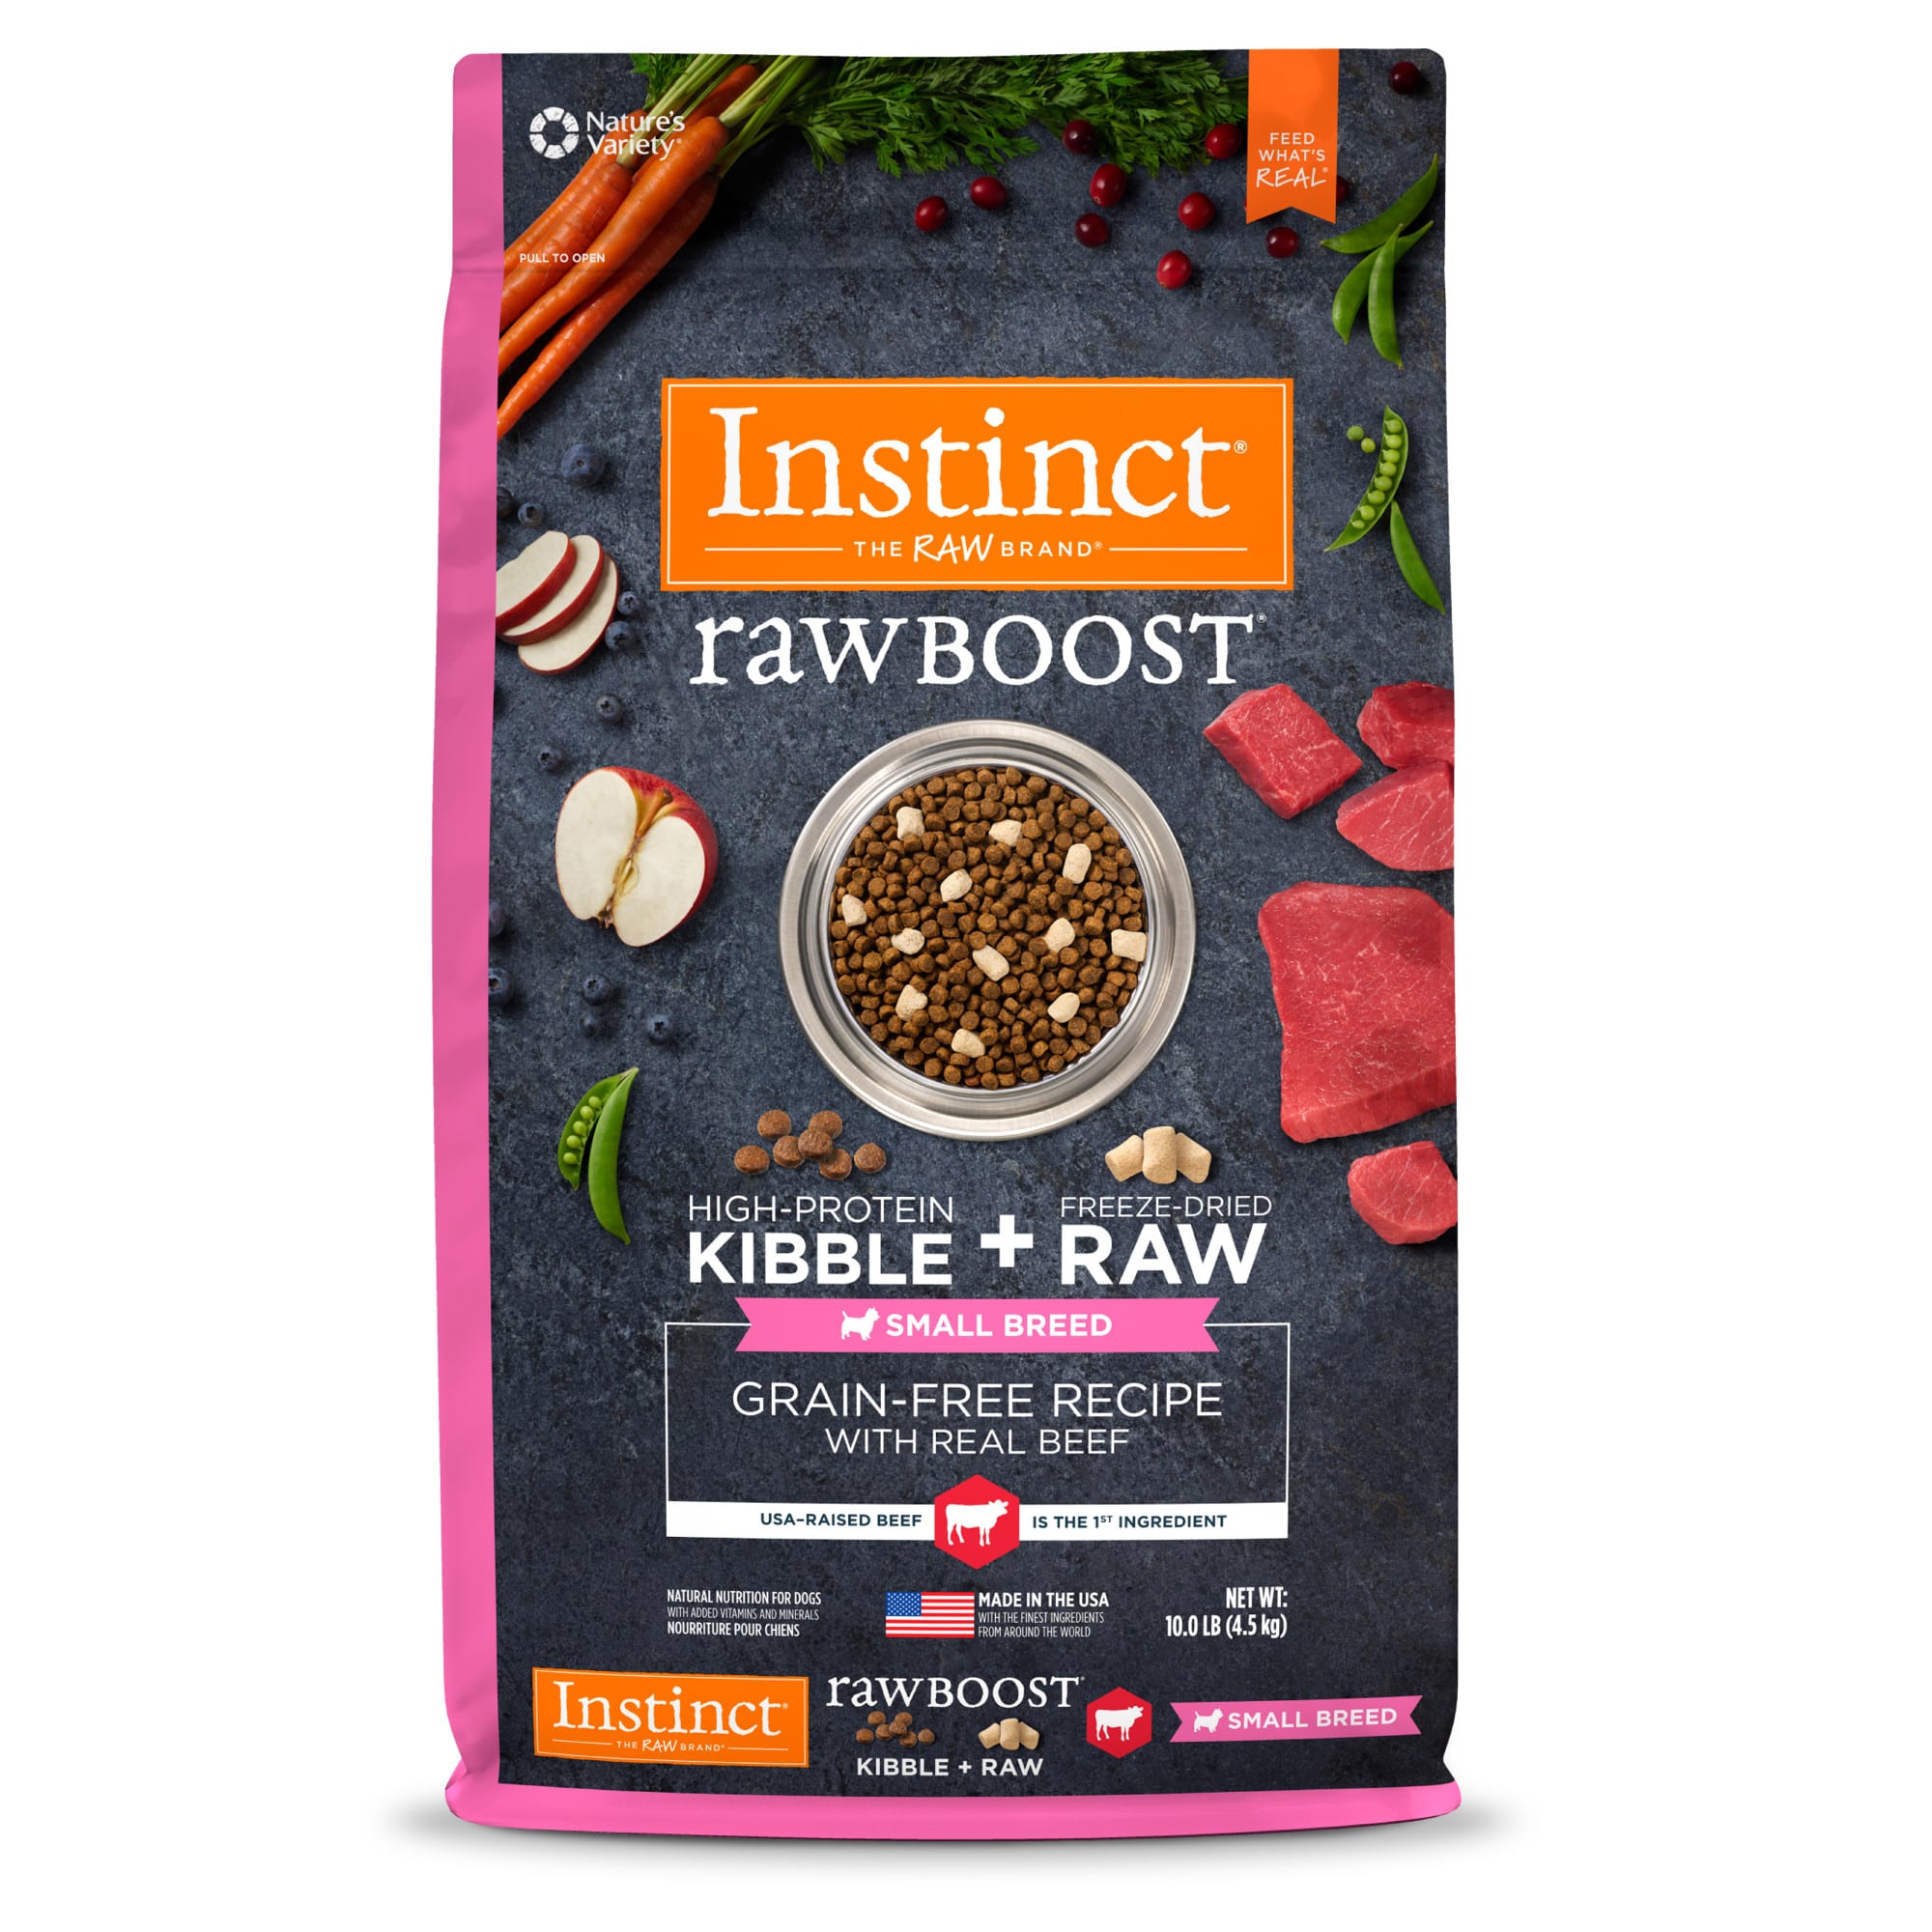 Instinct Raw Boost Small Breed GrainFree Recipe with Real